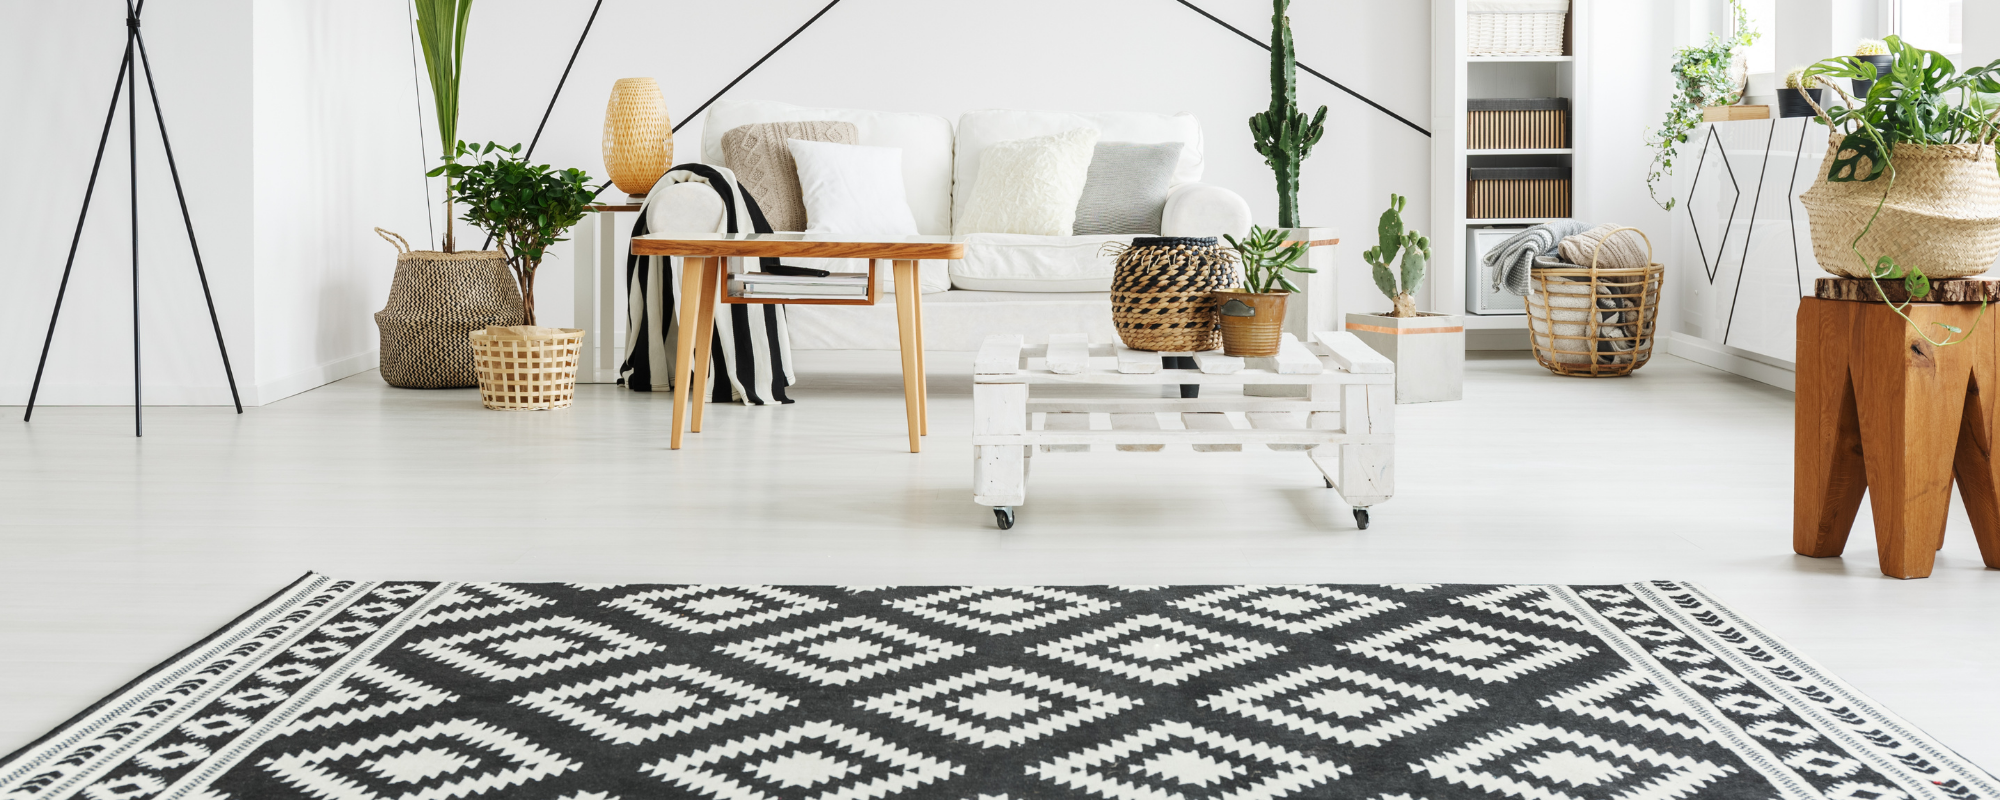 The Best Black And White Rugs For Your, Black And White Rugs